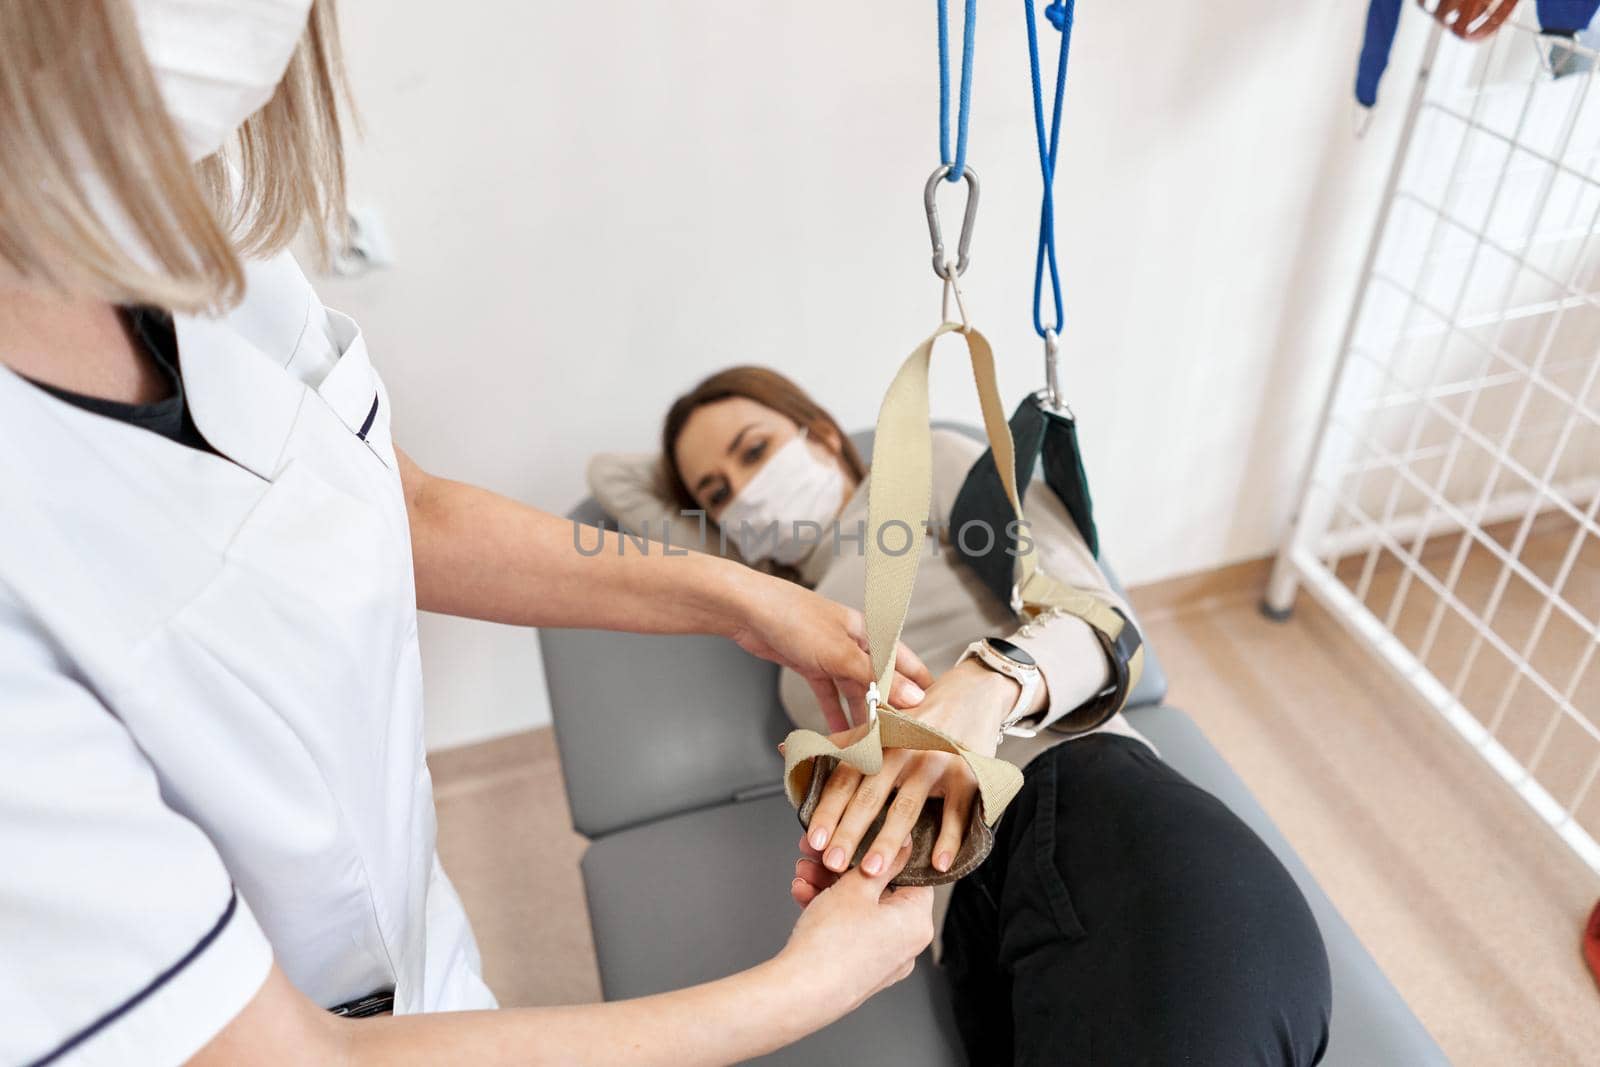 Physiotherapist rehabilitating the hand of a patient by WesternExoticStockers